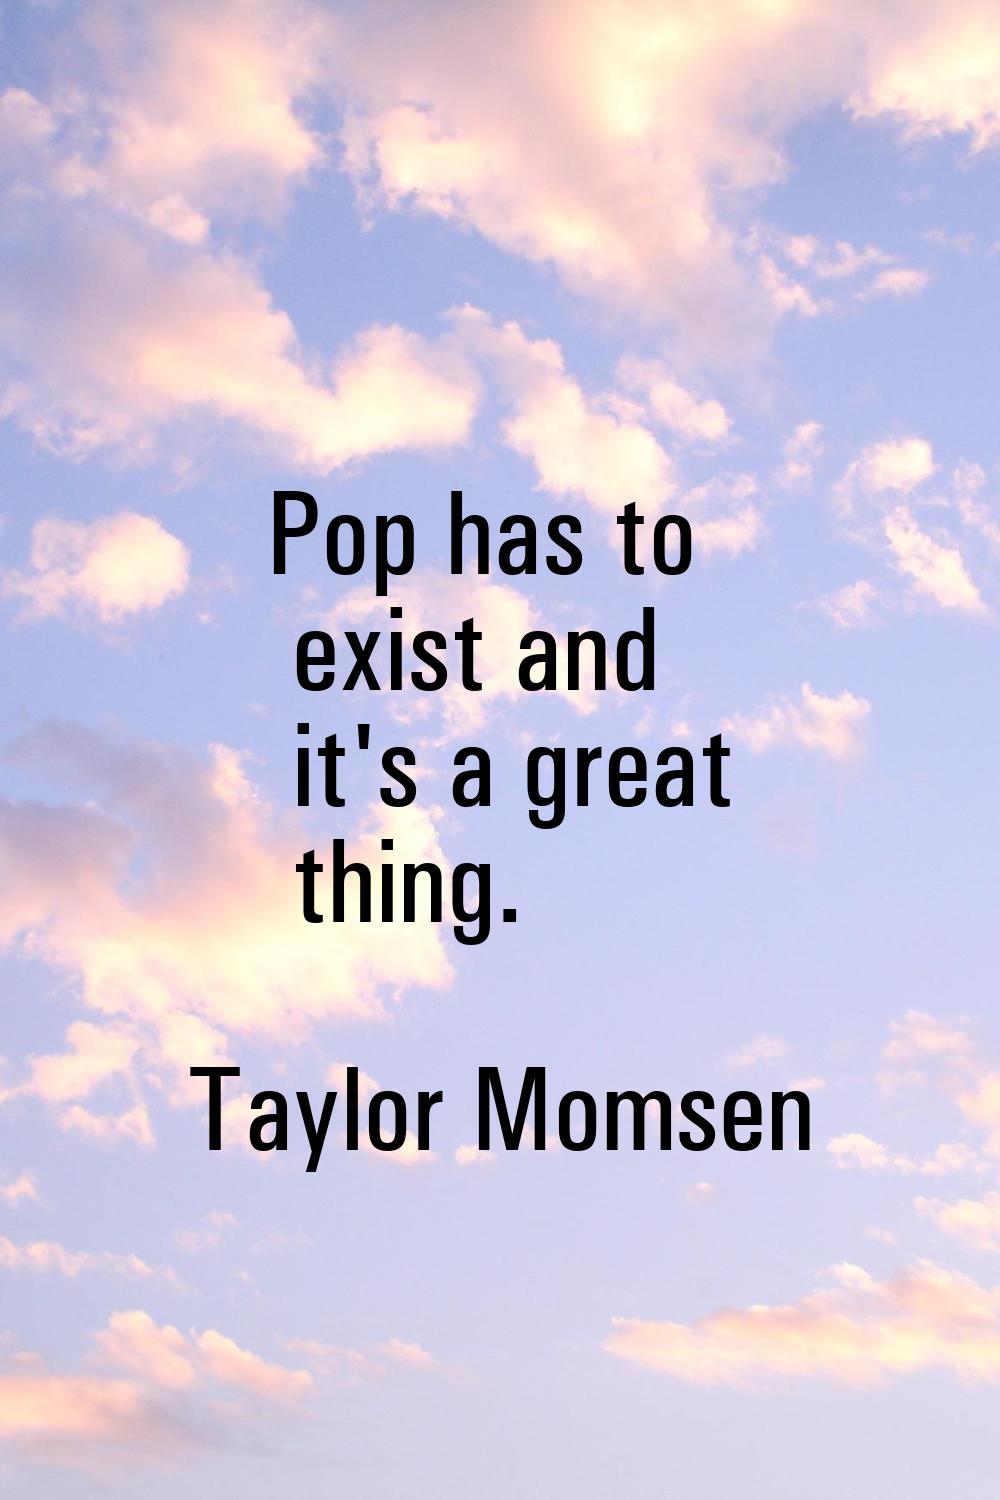 Pop has to exist and it's a great thing.